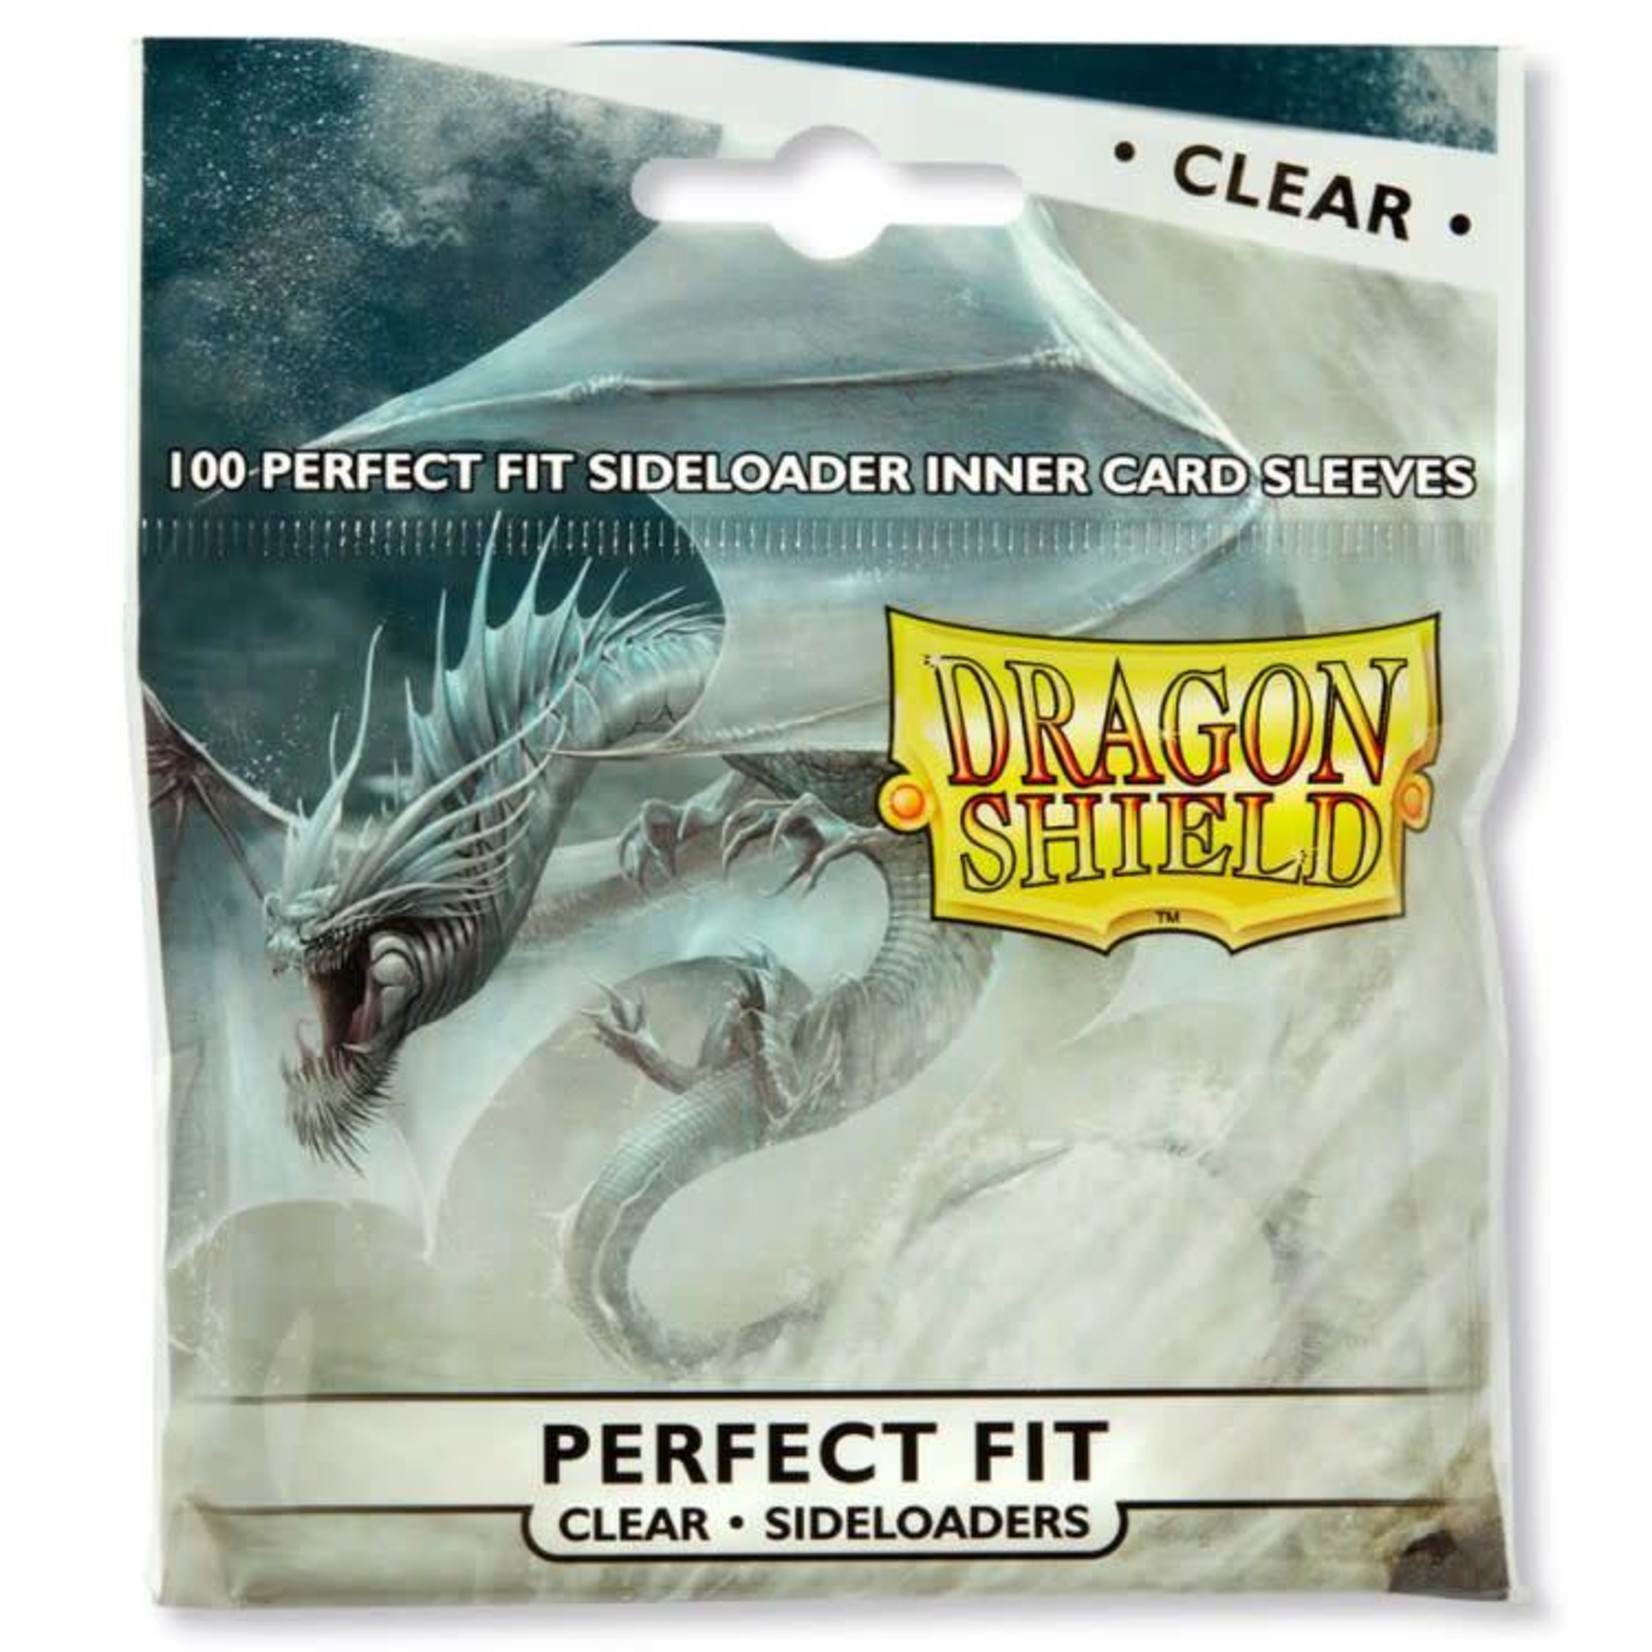 Arcane Tinman Dragon Shield: Perfect Fit Cards Sleeves - Side-load Clear (100)